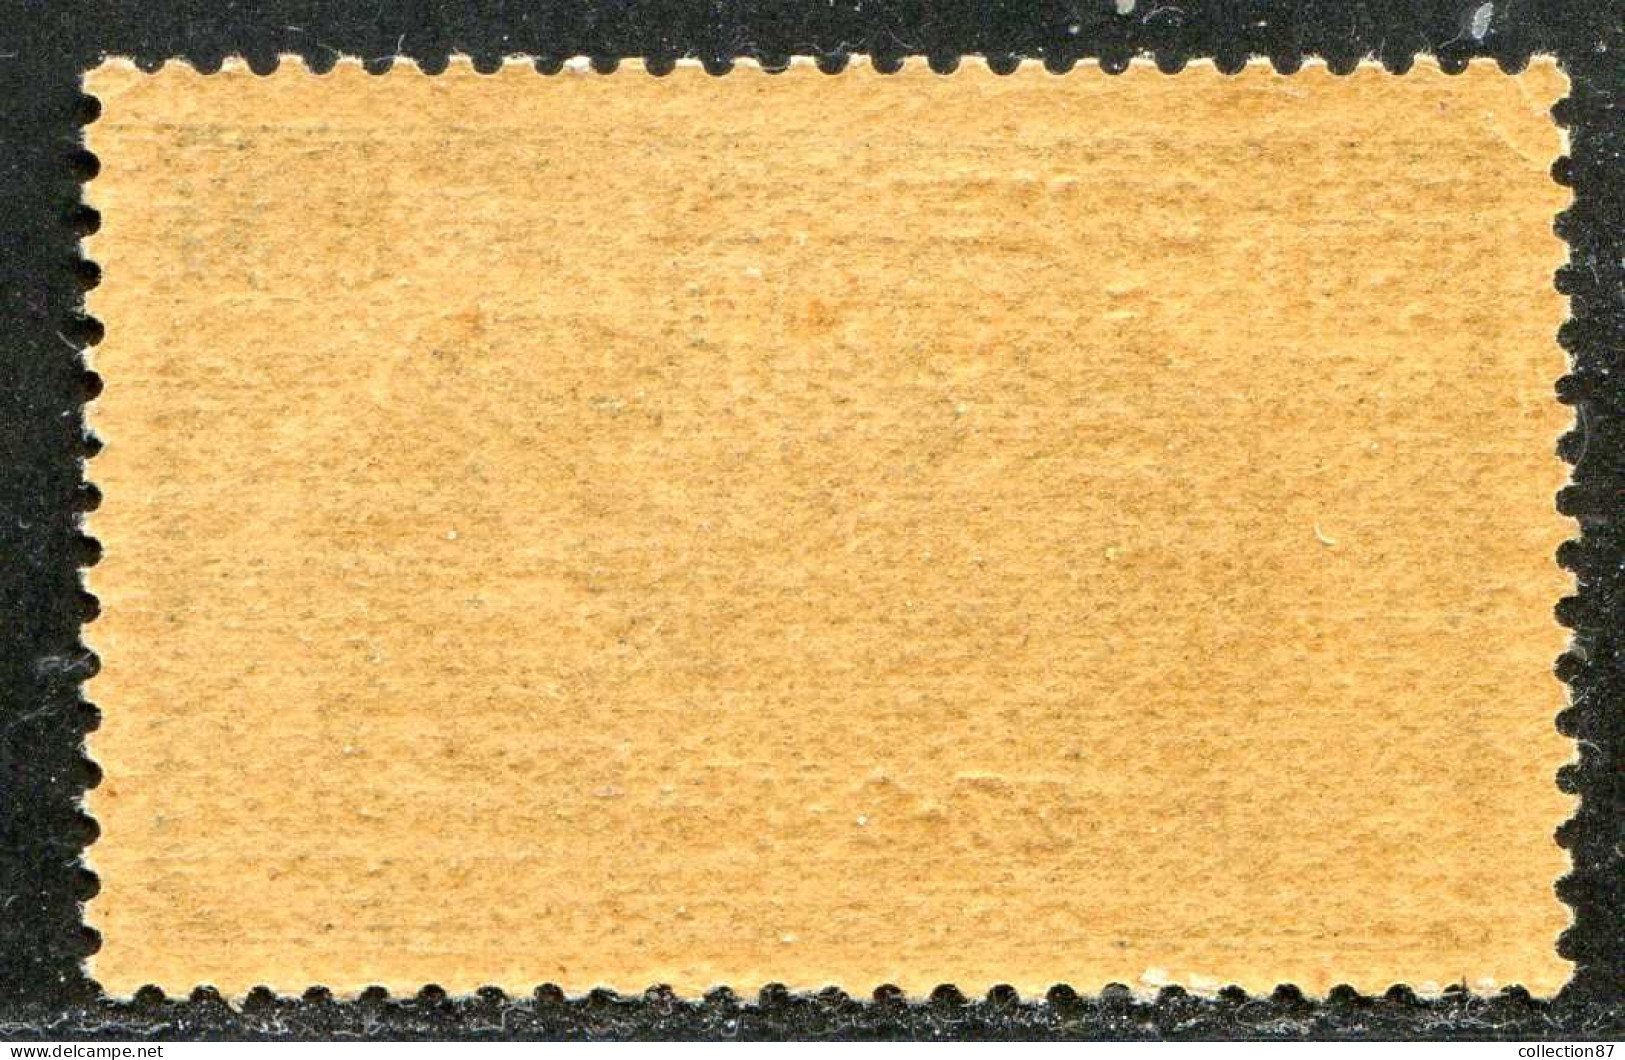 REF090 > CAMEROUN < Yv N° 221 * * Neuf Luxe Dos Visible -- MNH * * -- ELEPHANT - Unused Stamps